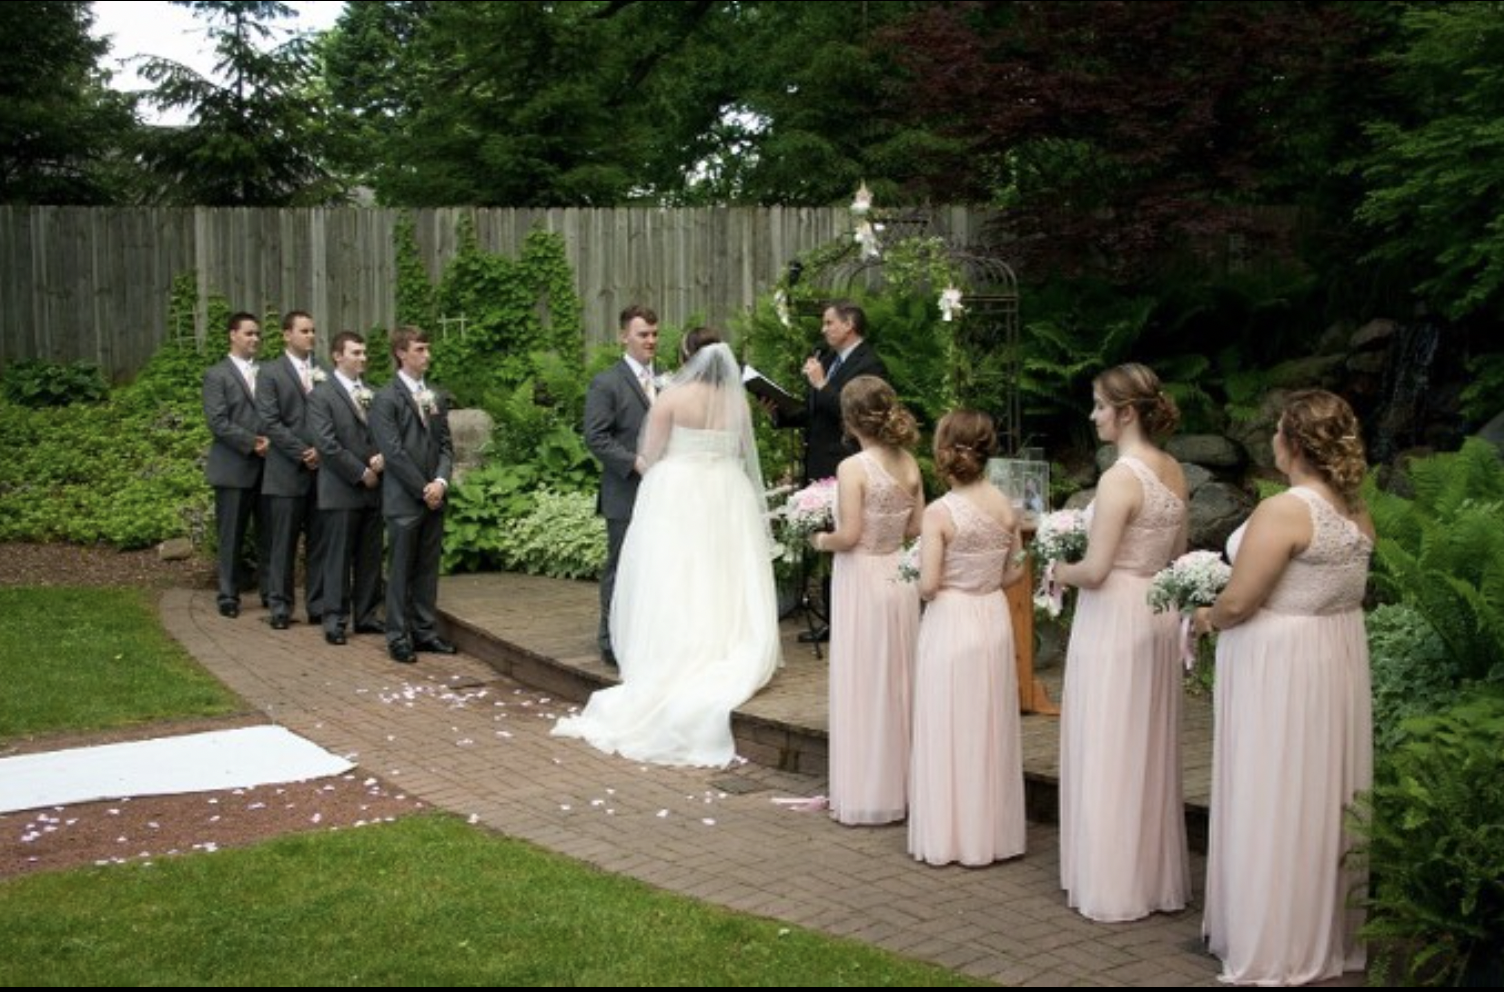 Bride and groom hold hands as their wedding parties look on in outdoor wedding ceremony